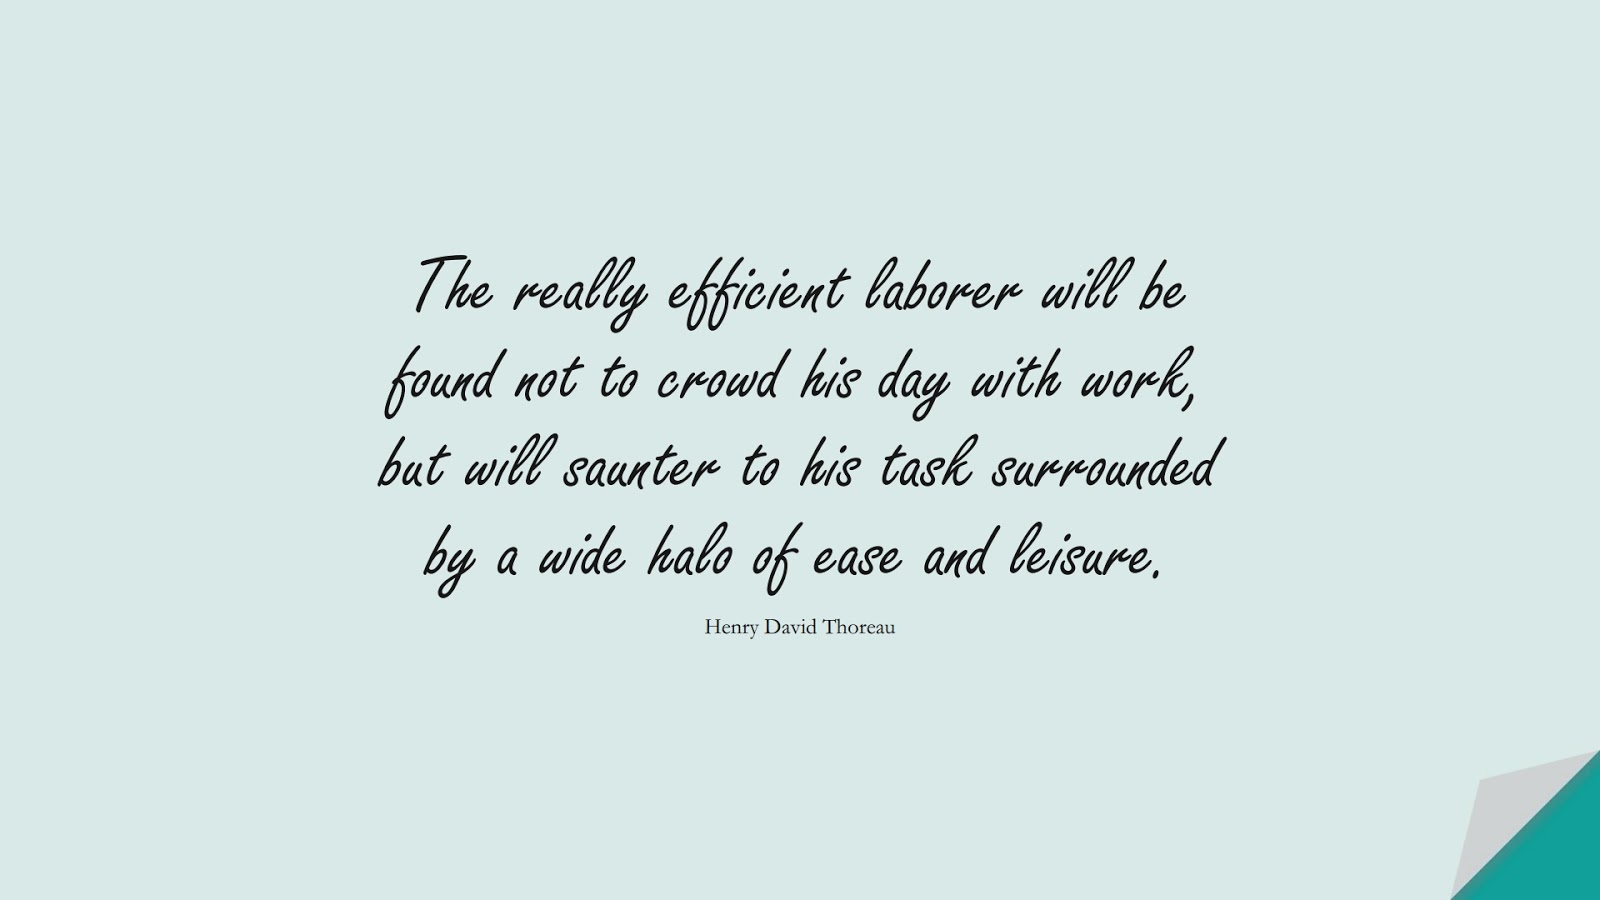 The really efficient laborer will be found not to crowd his day with work, but will saunter to his task surrounded by a wide halo of ease and leisure. (Henry David Thoreau);  #HardWorkQuotes